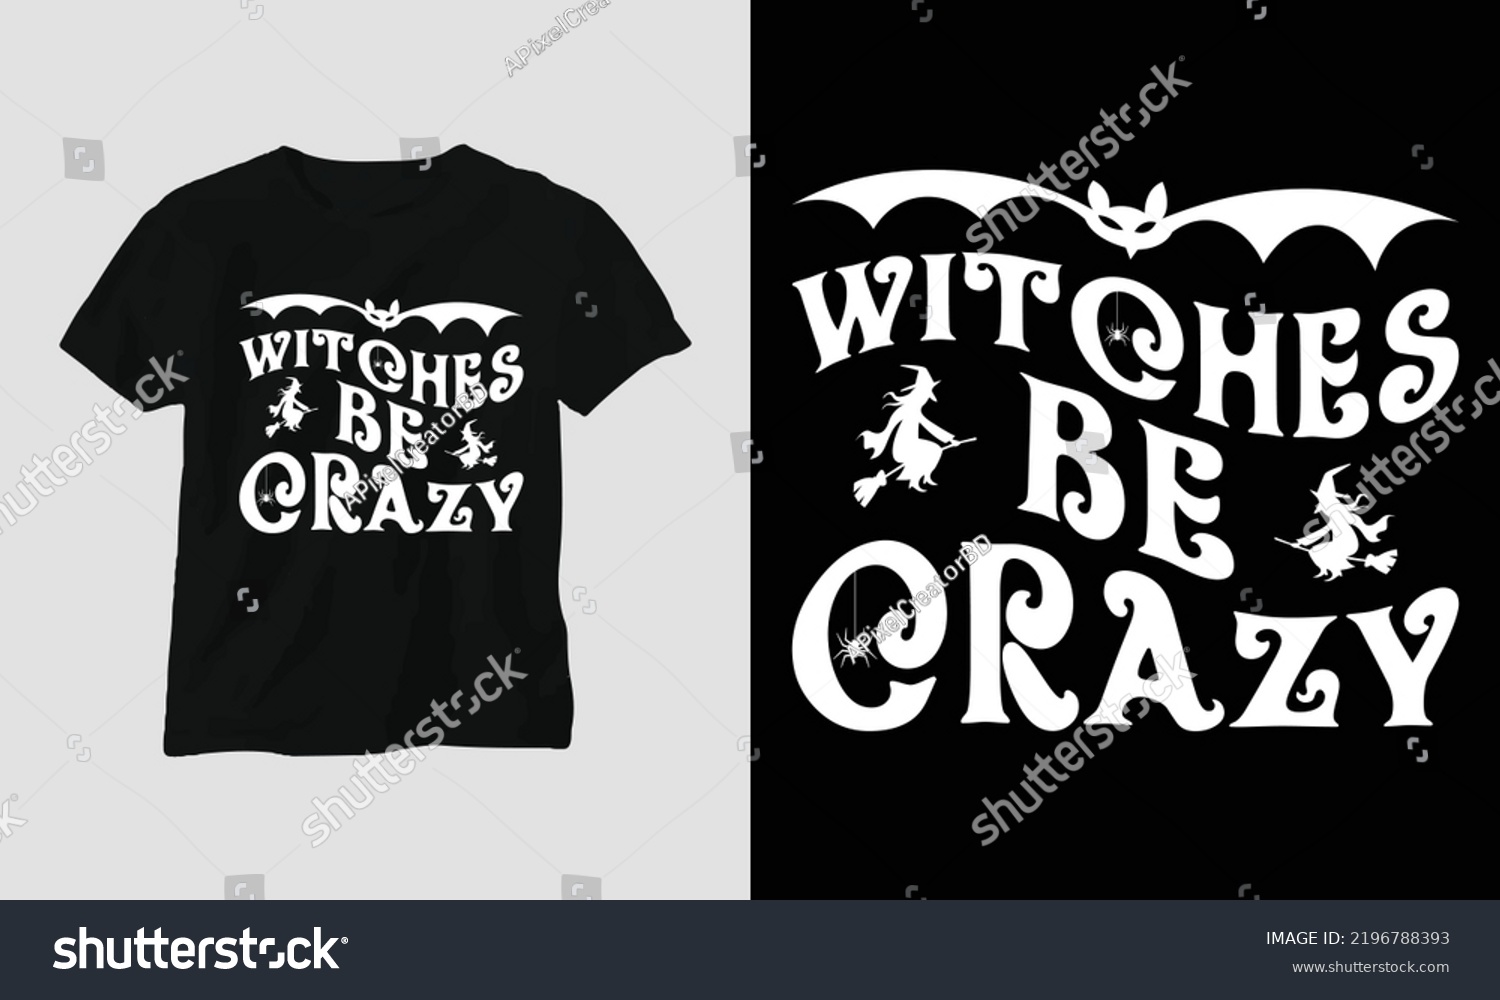 SVG of SVG Halloween Day Special T-shirt Typography Design with “witches be crazy”. Best for T-Shirt, mag, sticker, wall mat, etc. svg